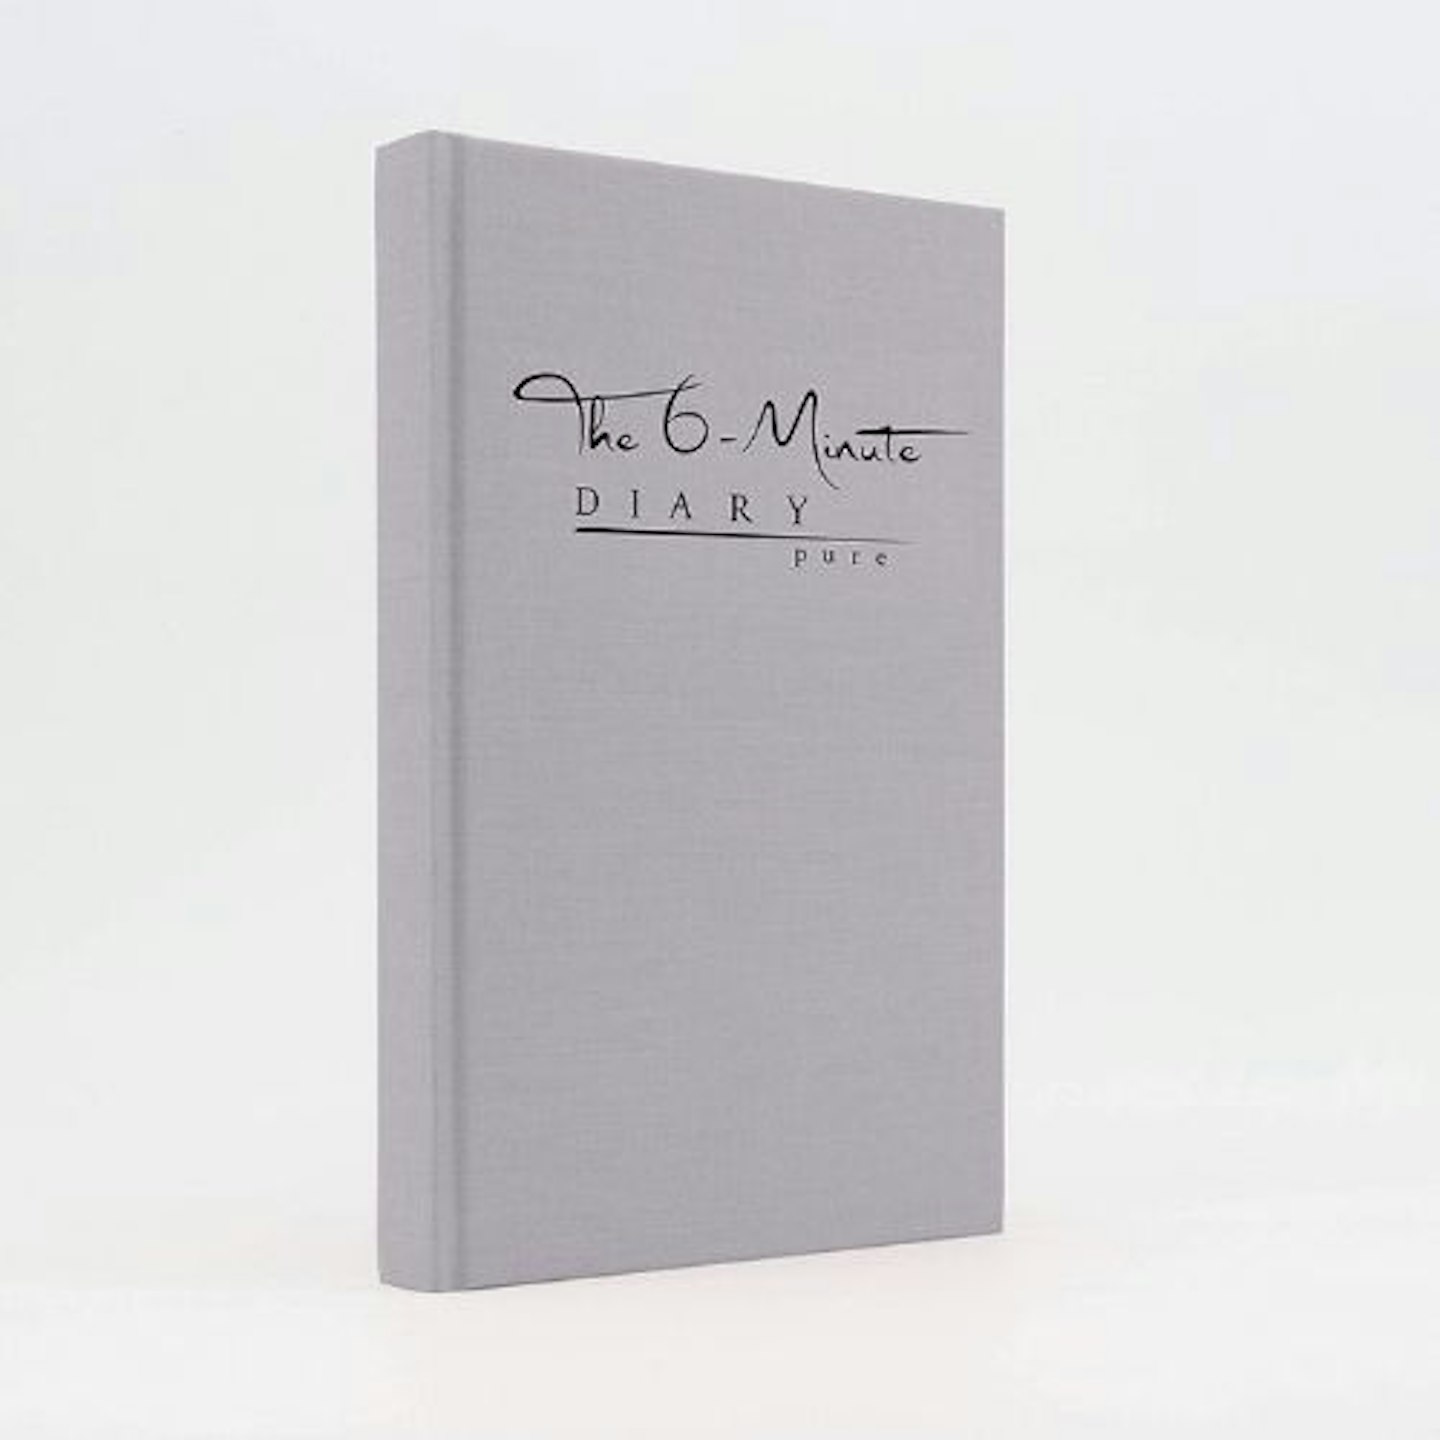 The 6-Minute Diary Pure